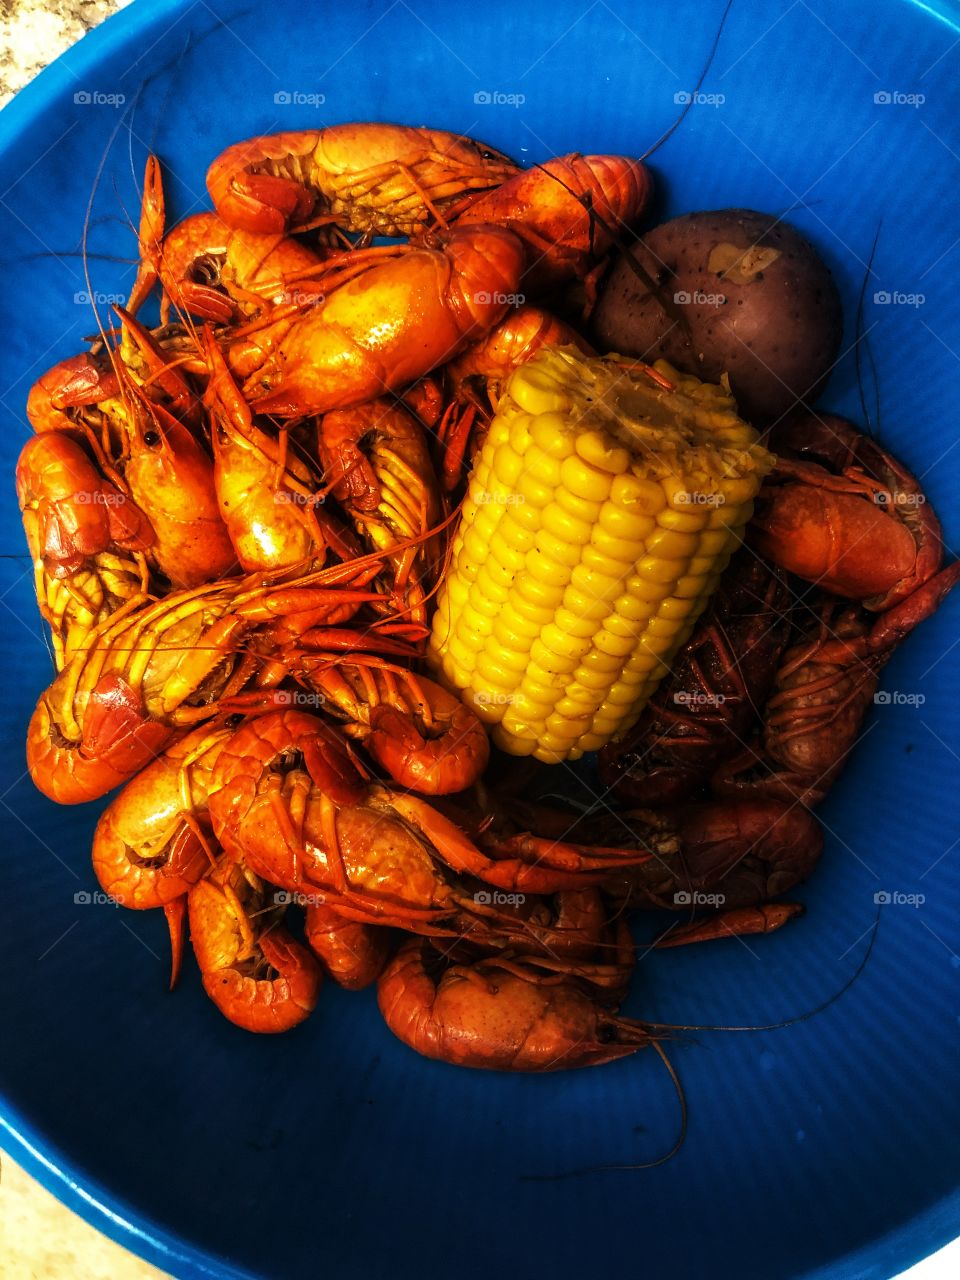 Colorful and tasty! It’s Crawfish season. This red is popping spicy and hot. Notice all the primary colors! Red, yellow, and blue. 